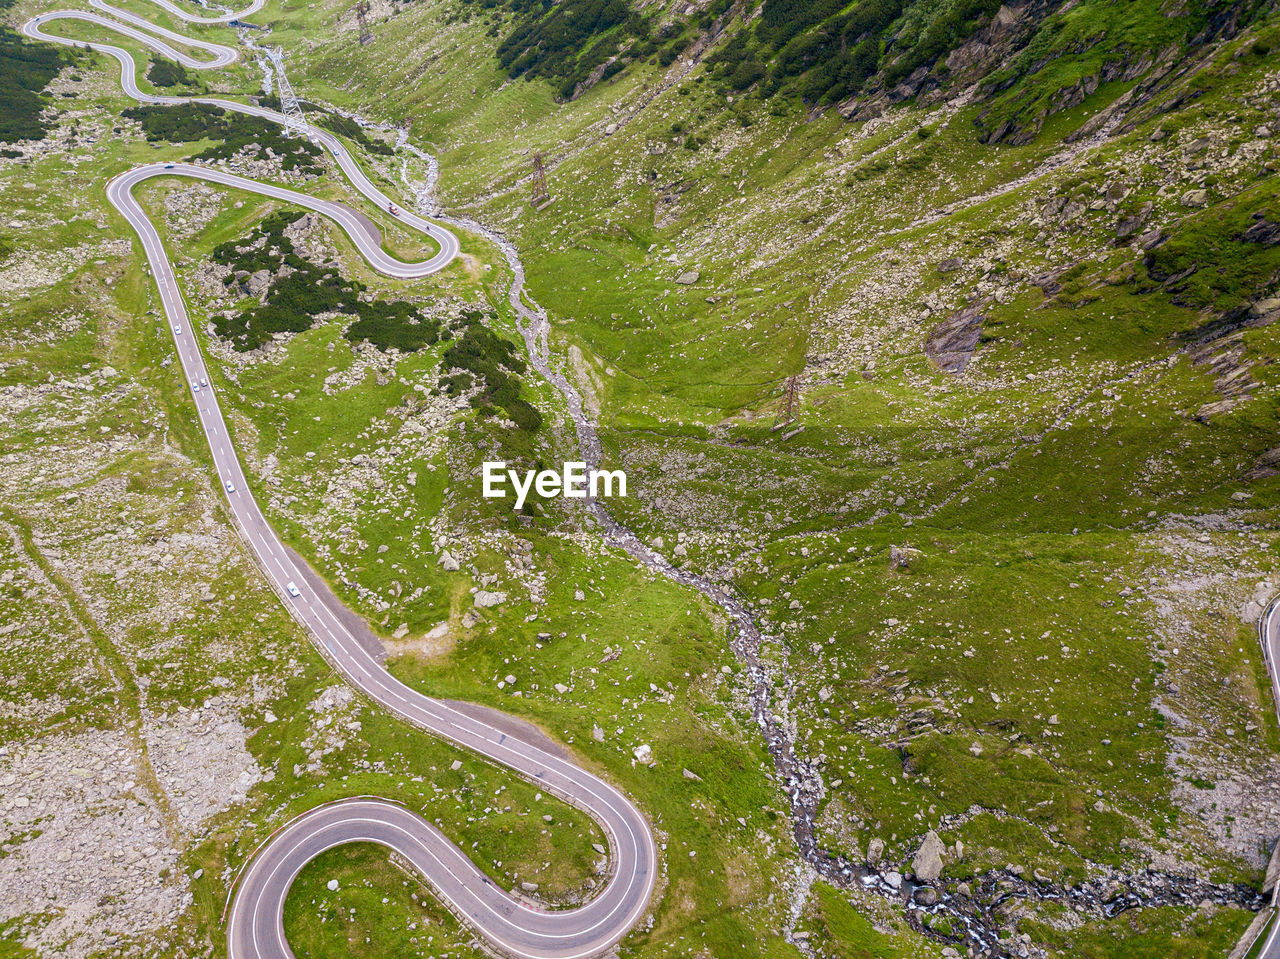 Winding road aerial view by drone. sibii, romania. a great place to drive and stop during a trip.